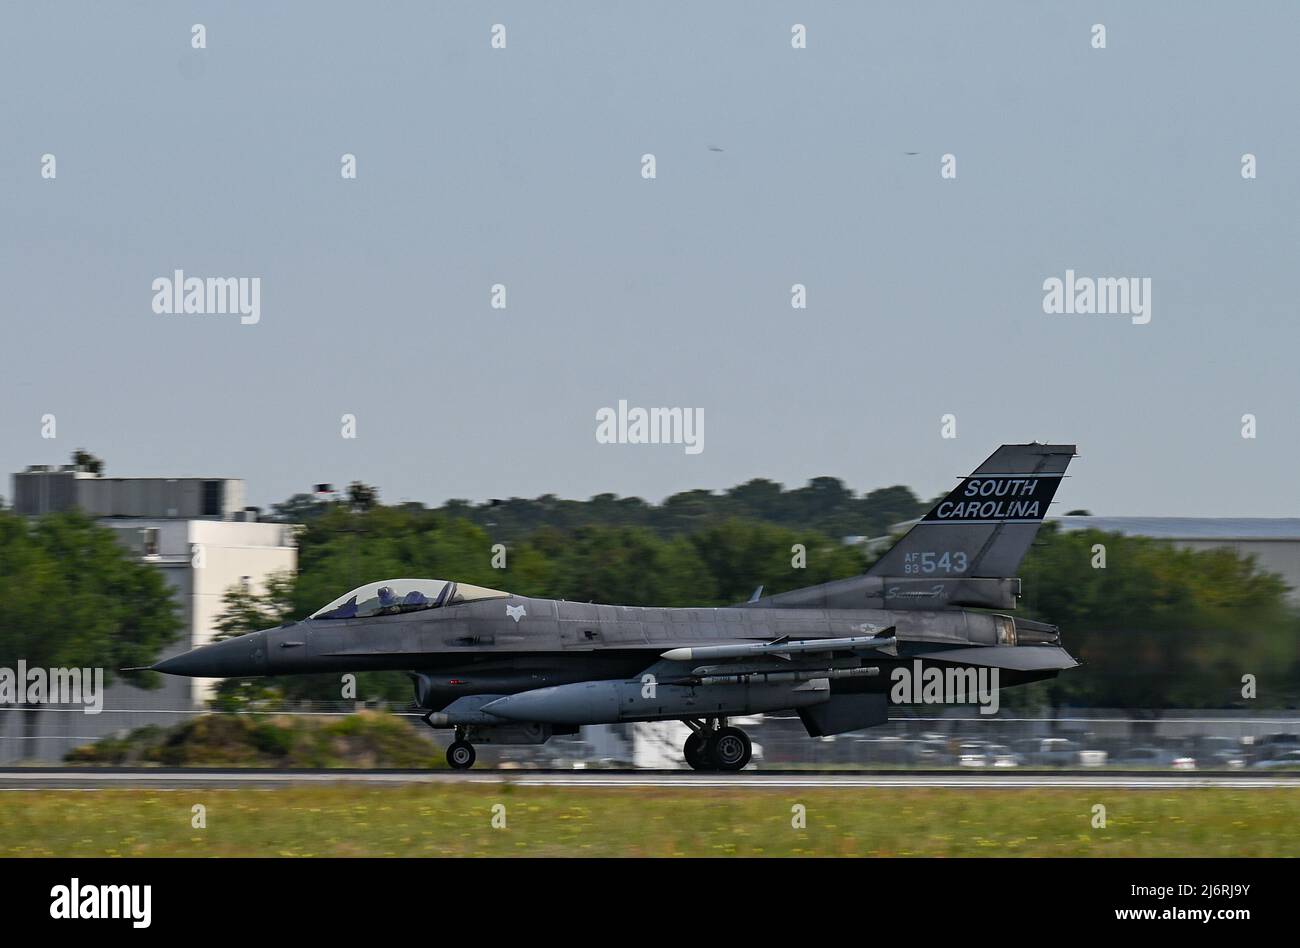 A U.S. Air Force F-16 Fighting Falcon jet from the 169th Fighter Wing, South Carolina Air National Guard, takes off from the Savannah-Hilton Head Int’l Airport, Georgia on May 2, 2022 on the first day of Sentry Savannah 2022, the Air National Guard’s premier 4th and 5th generation counter air exercise. This total force integrated exercise showcases the nation's combat aircraft readiness, tests the capabilities of our warfighters in a near-peer environment and trains our next generation of fighter pilots for tomorrow’s fight. (U.S. Air National Guard photo by Tech. Sgt. Caila Arahood) Stock Photo